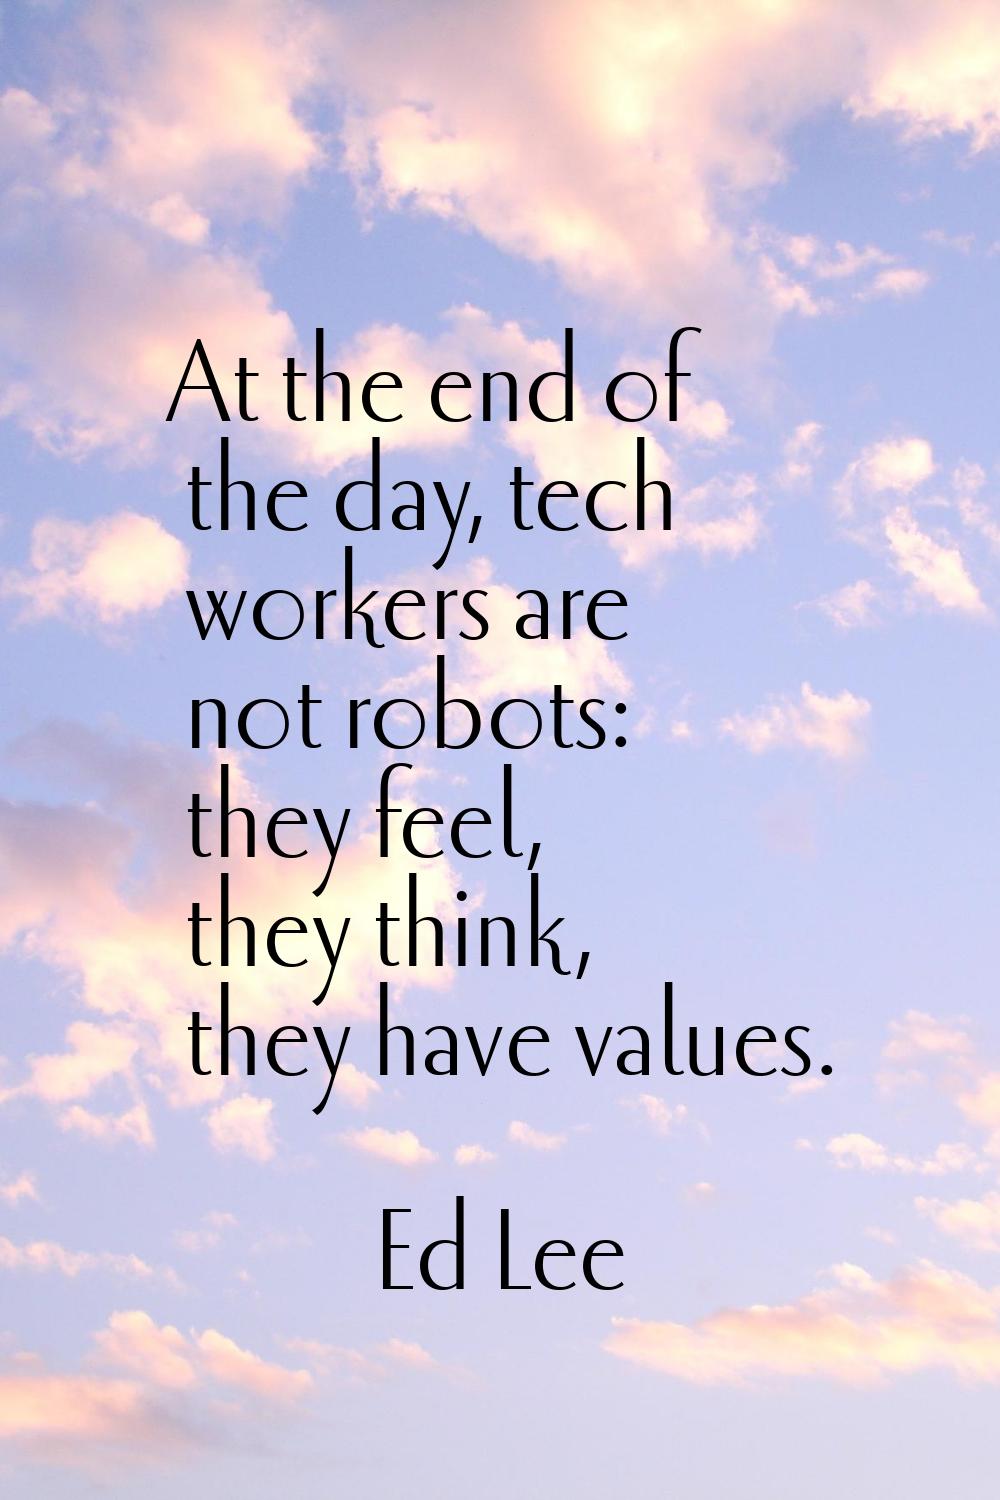 At the end of the day, tech workers are not robots: they feel, they think, they have values.